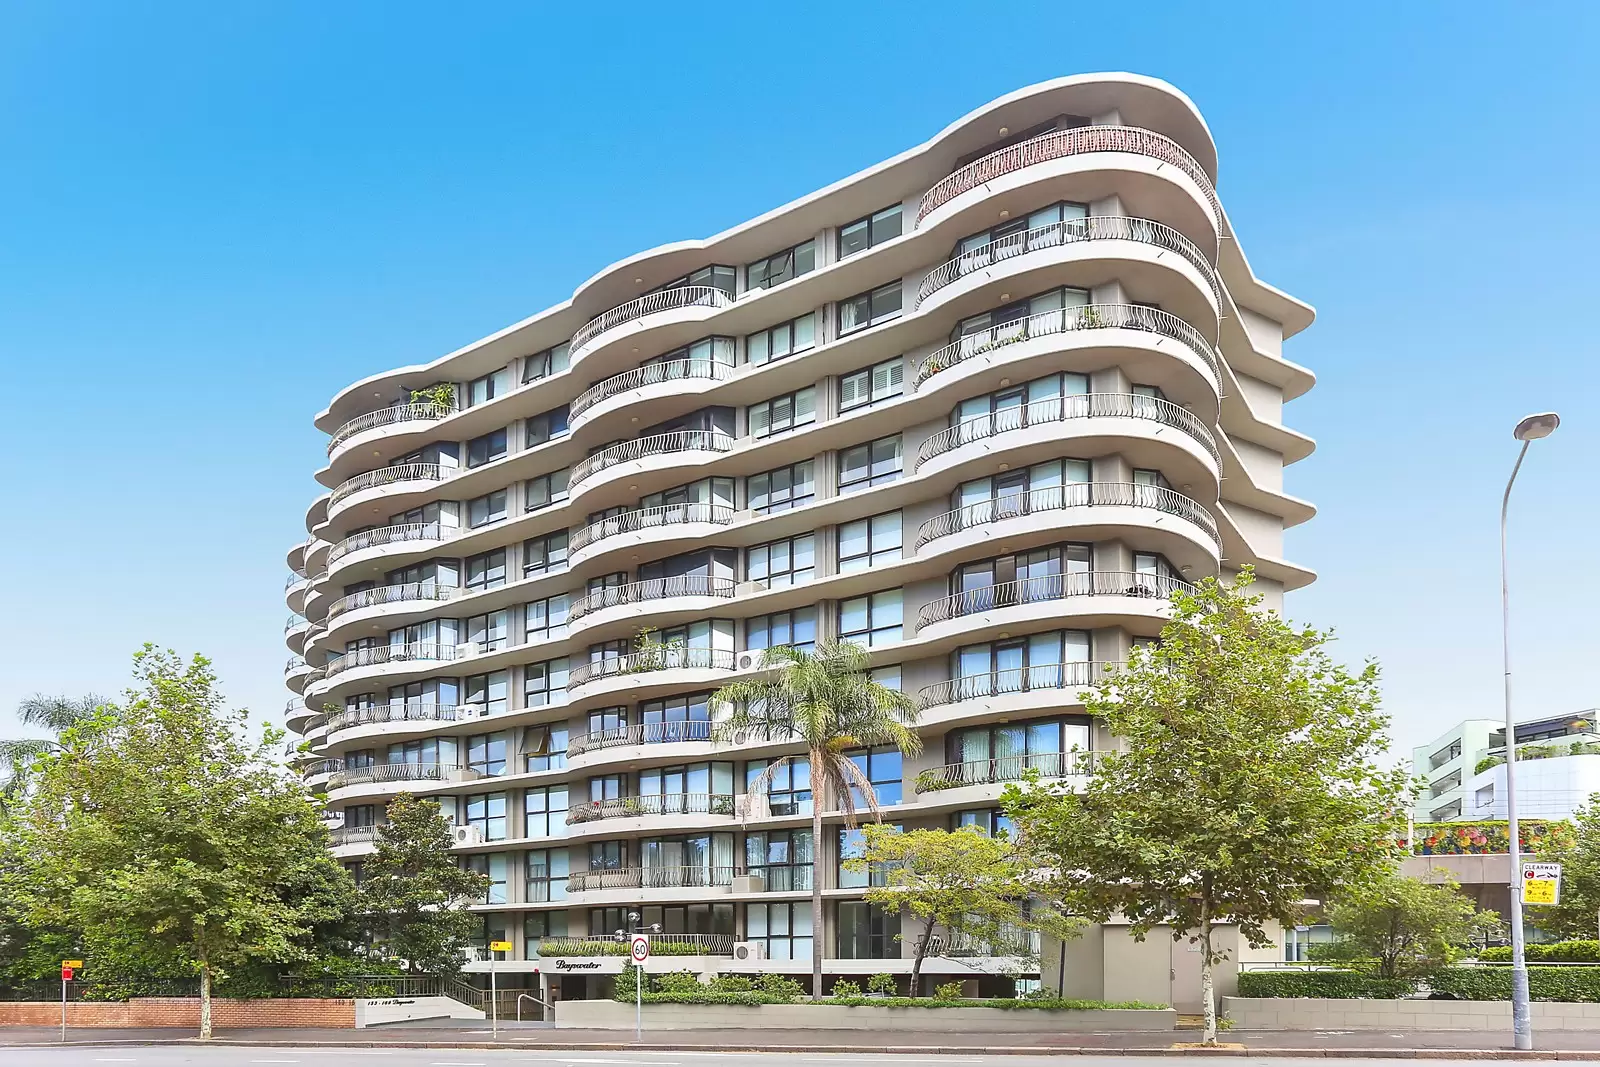 Photo #13: 9D/153 Bayswater Road, Rushcutters Bay - Sold by Sydney Sotheby's International Realty